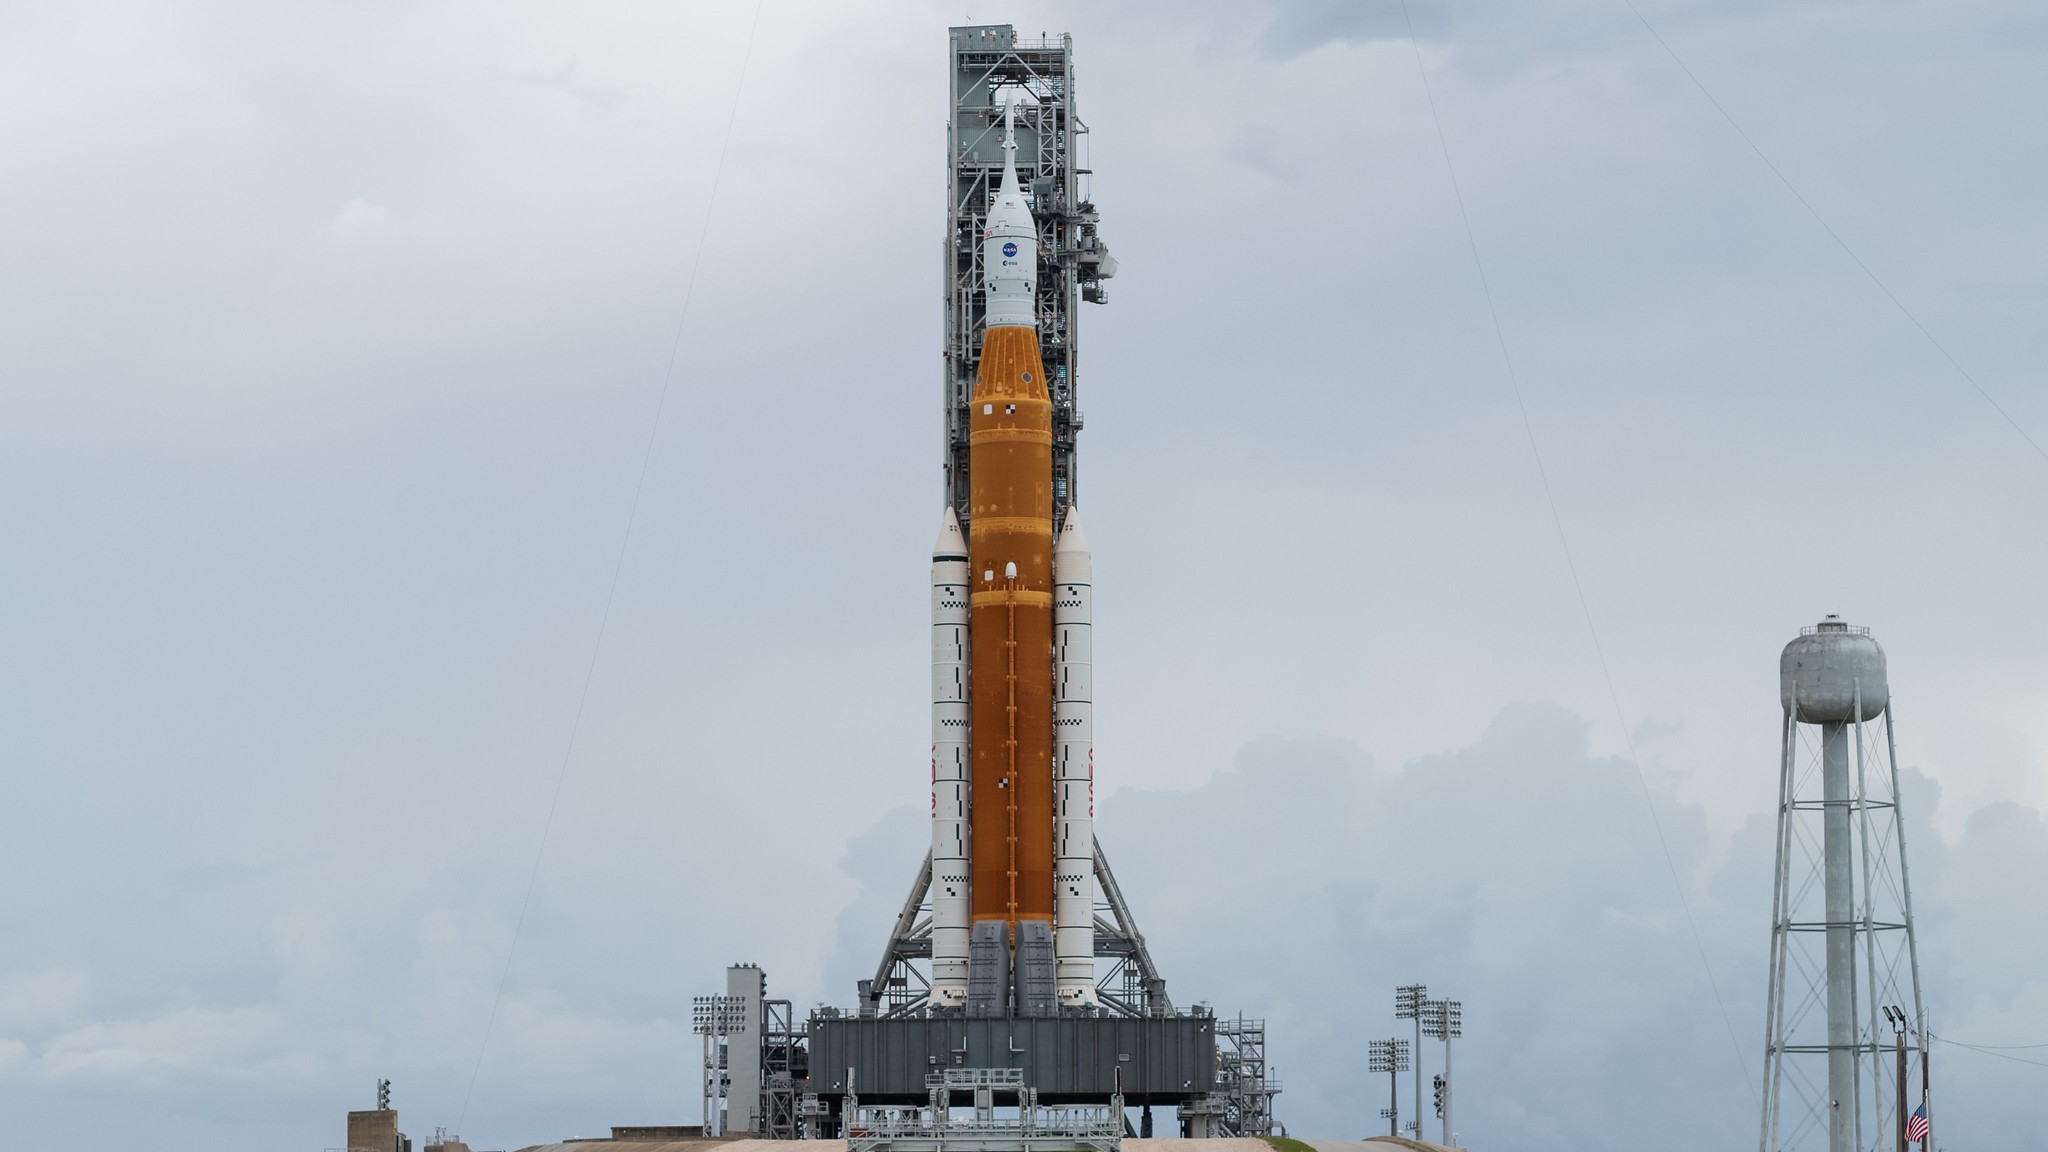 giant artemis 1 space launch system rocket on a gray cloudy background